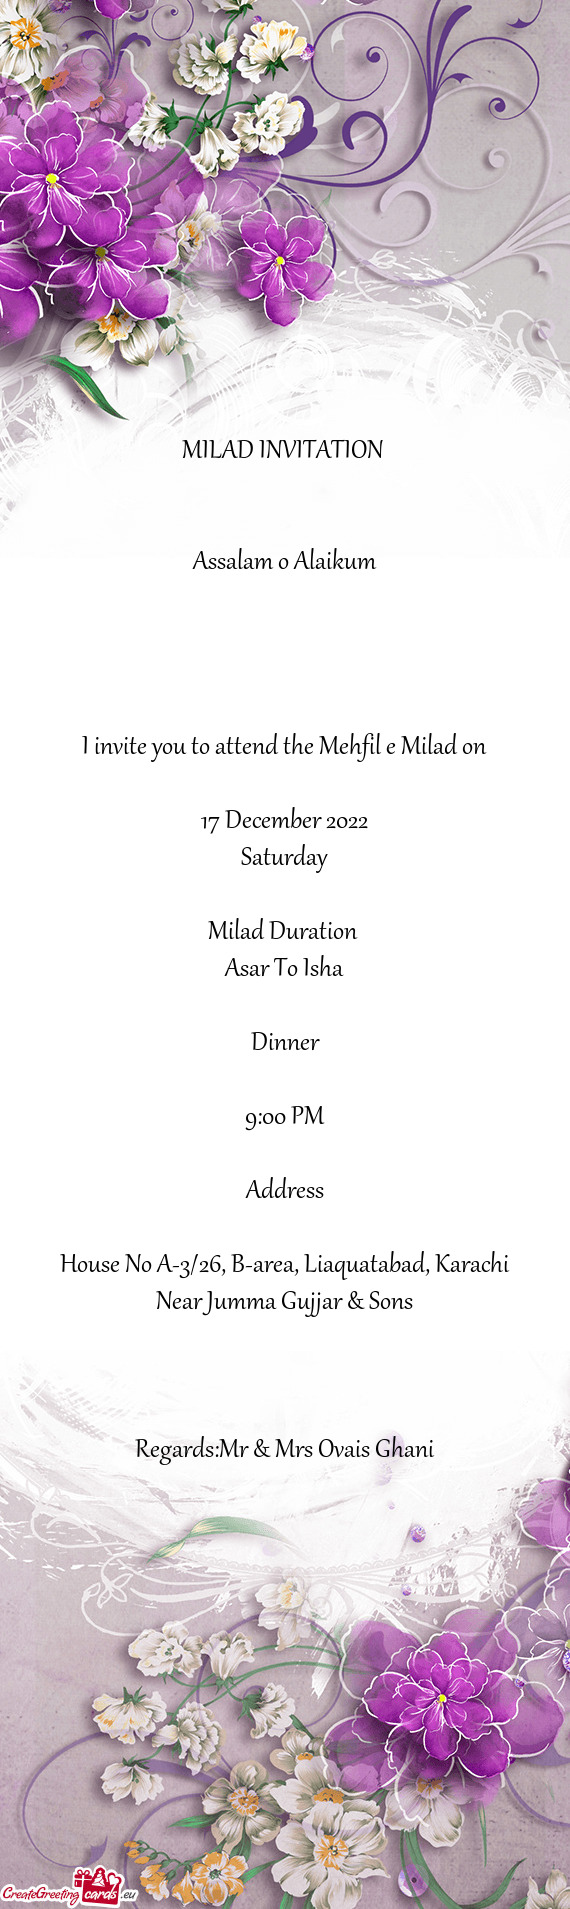 I invite you to attend the Mehfil e Milad on